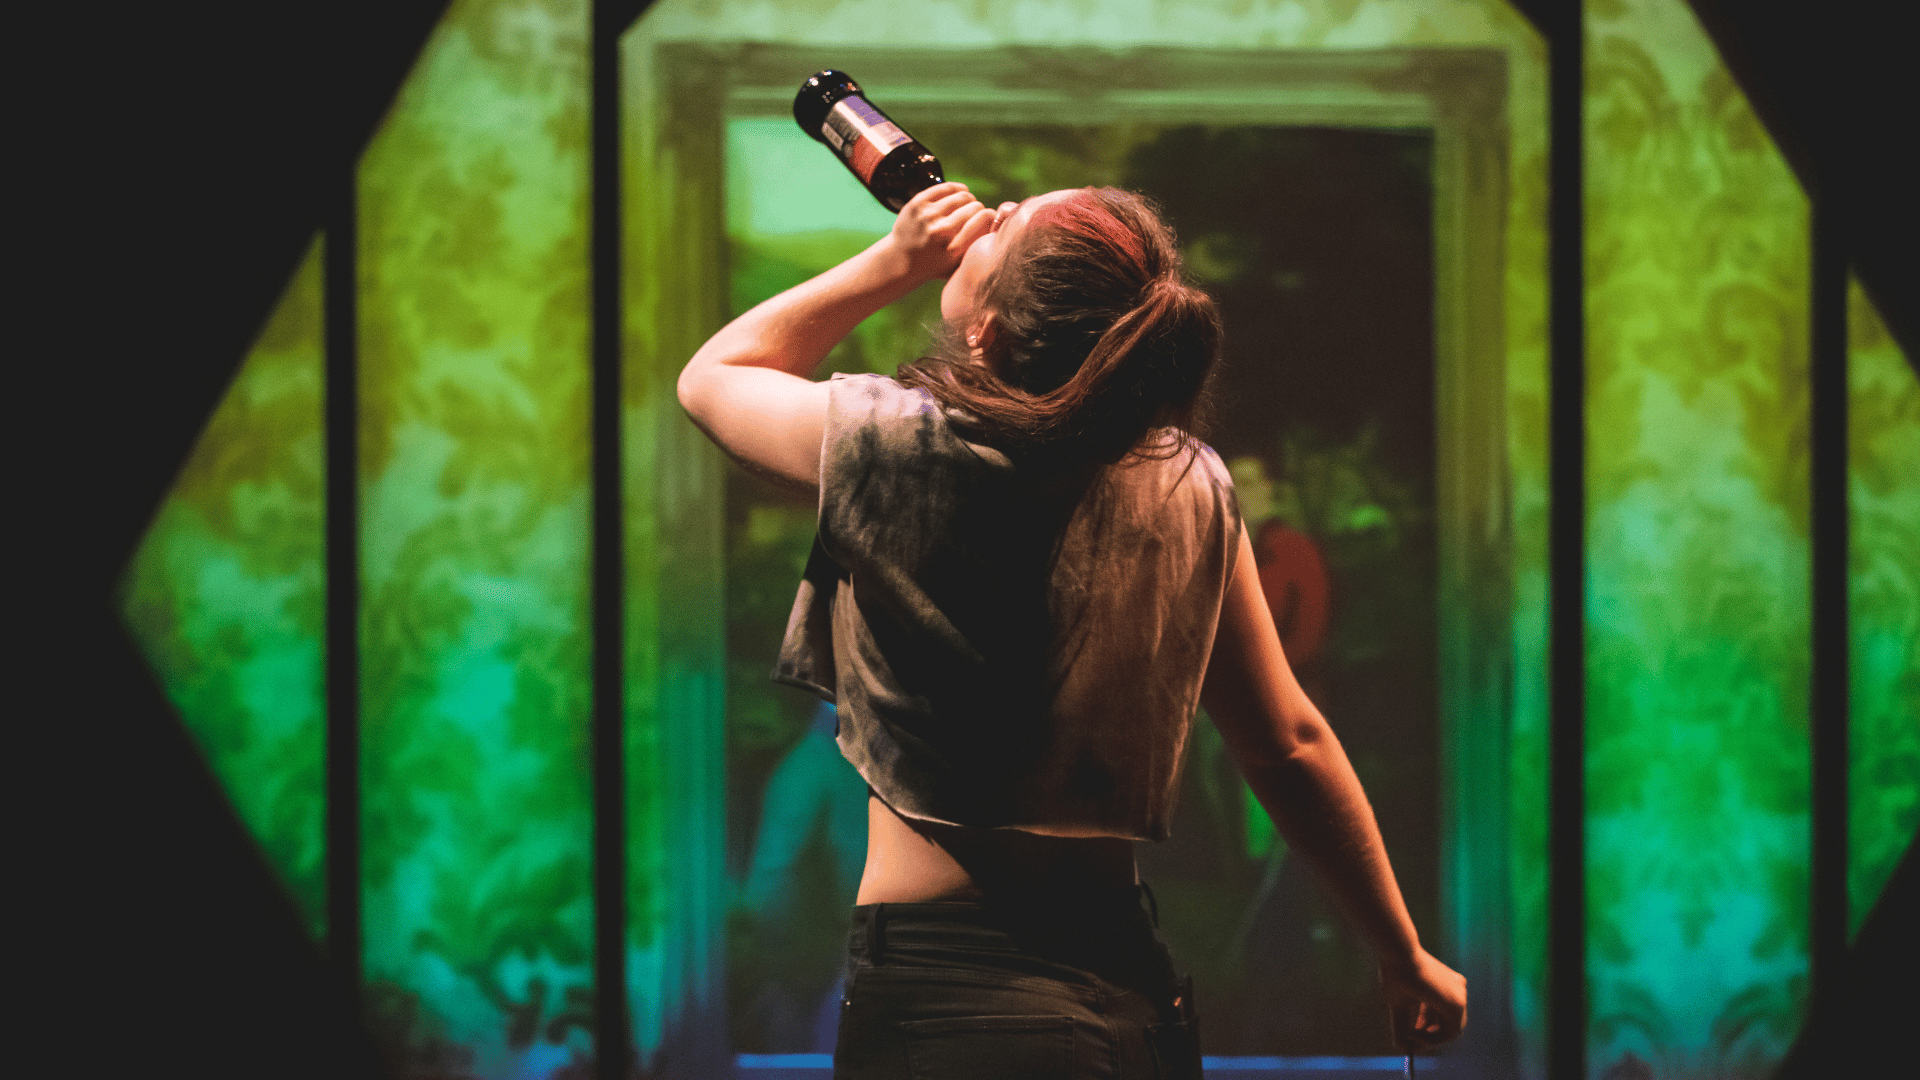 The Honey Man Production Photo: Misty (Amy Kennedy) dances and takes a swig from a bottle of beer, backlit by a colourful projection